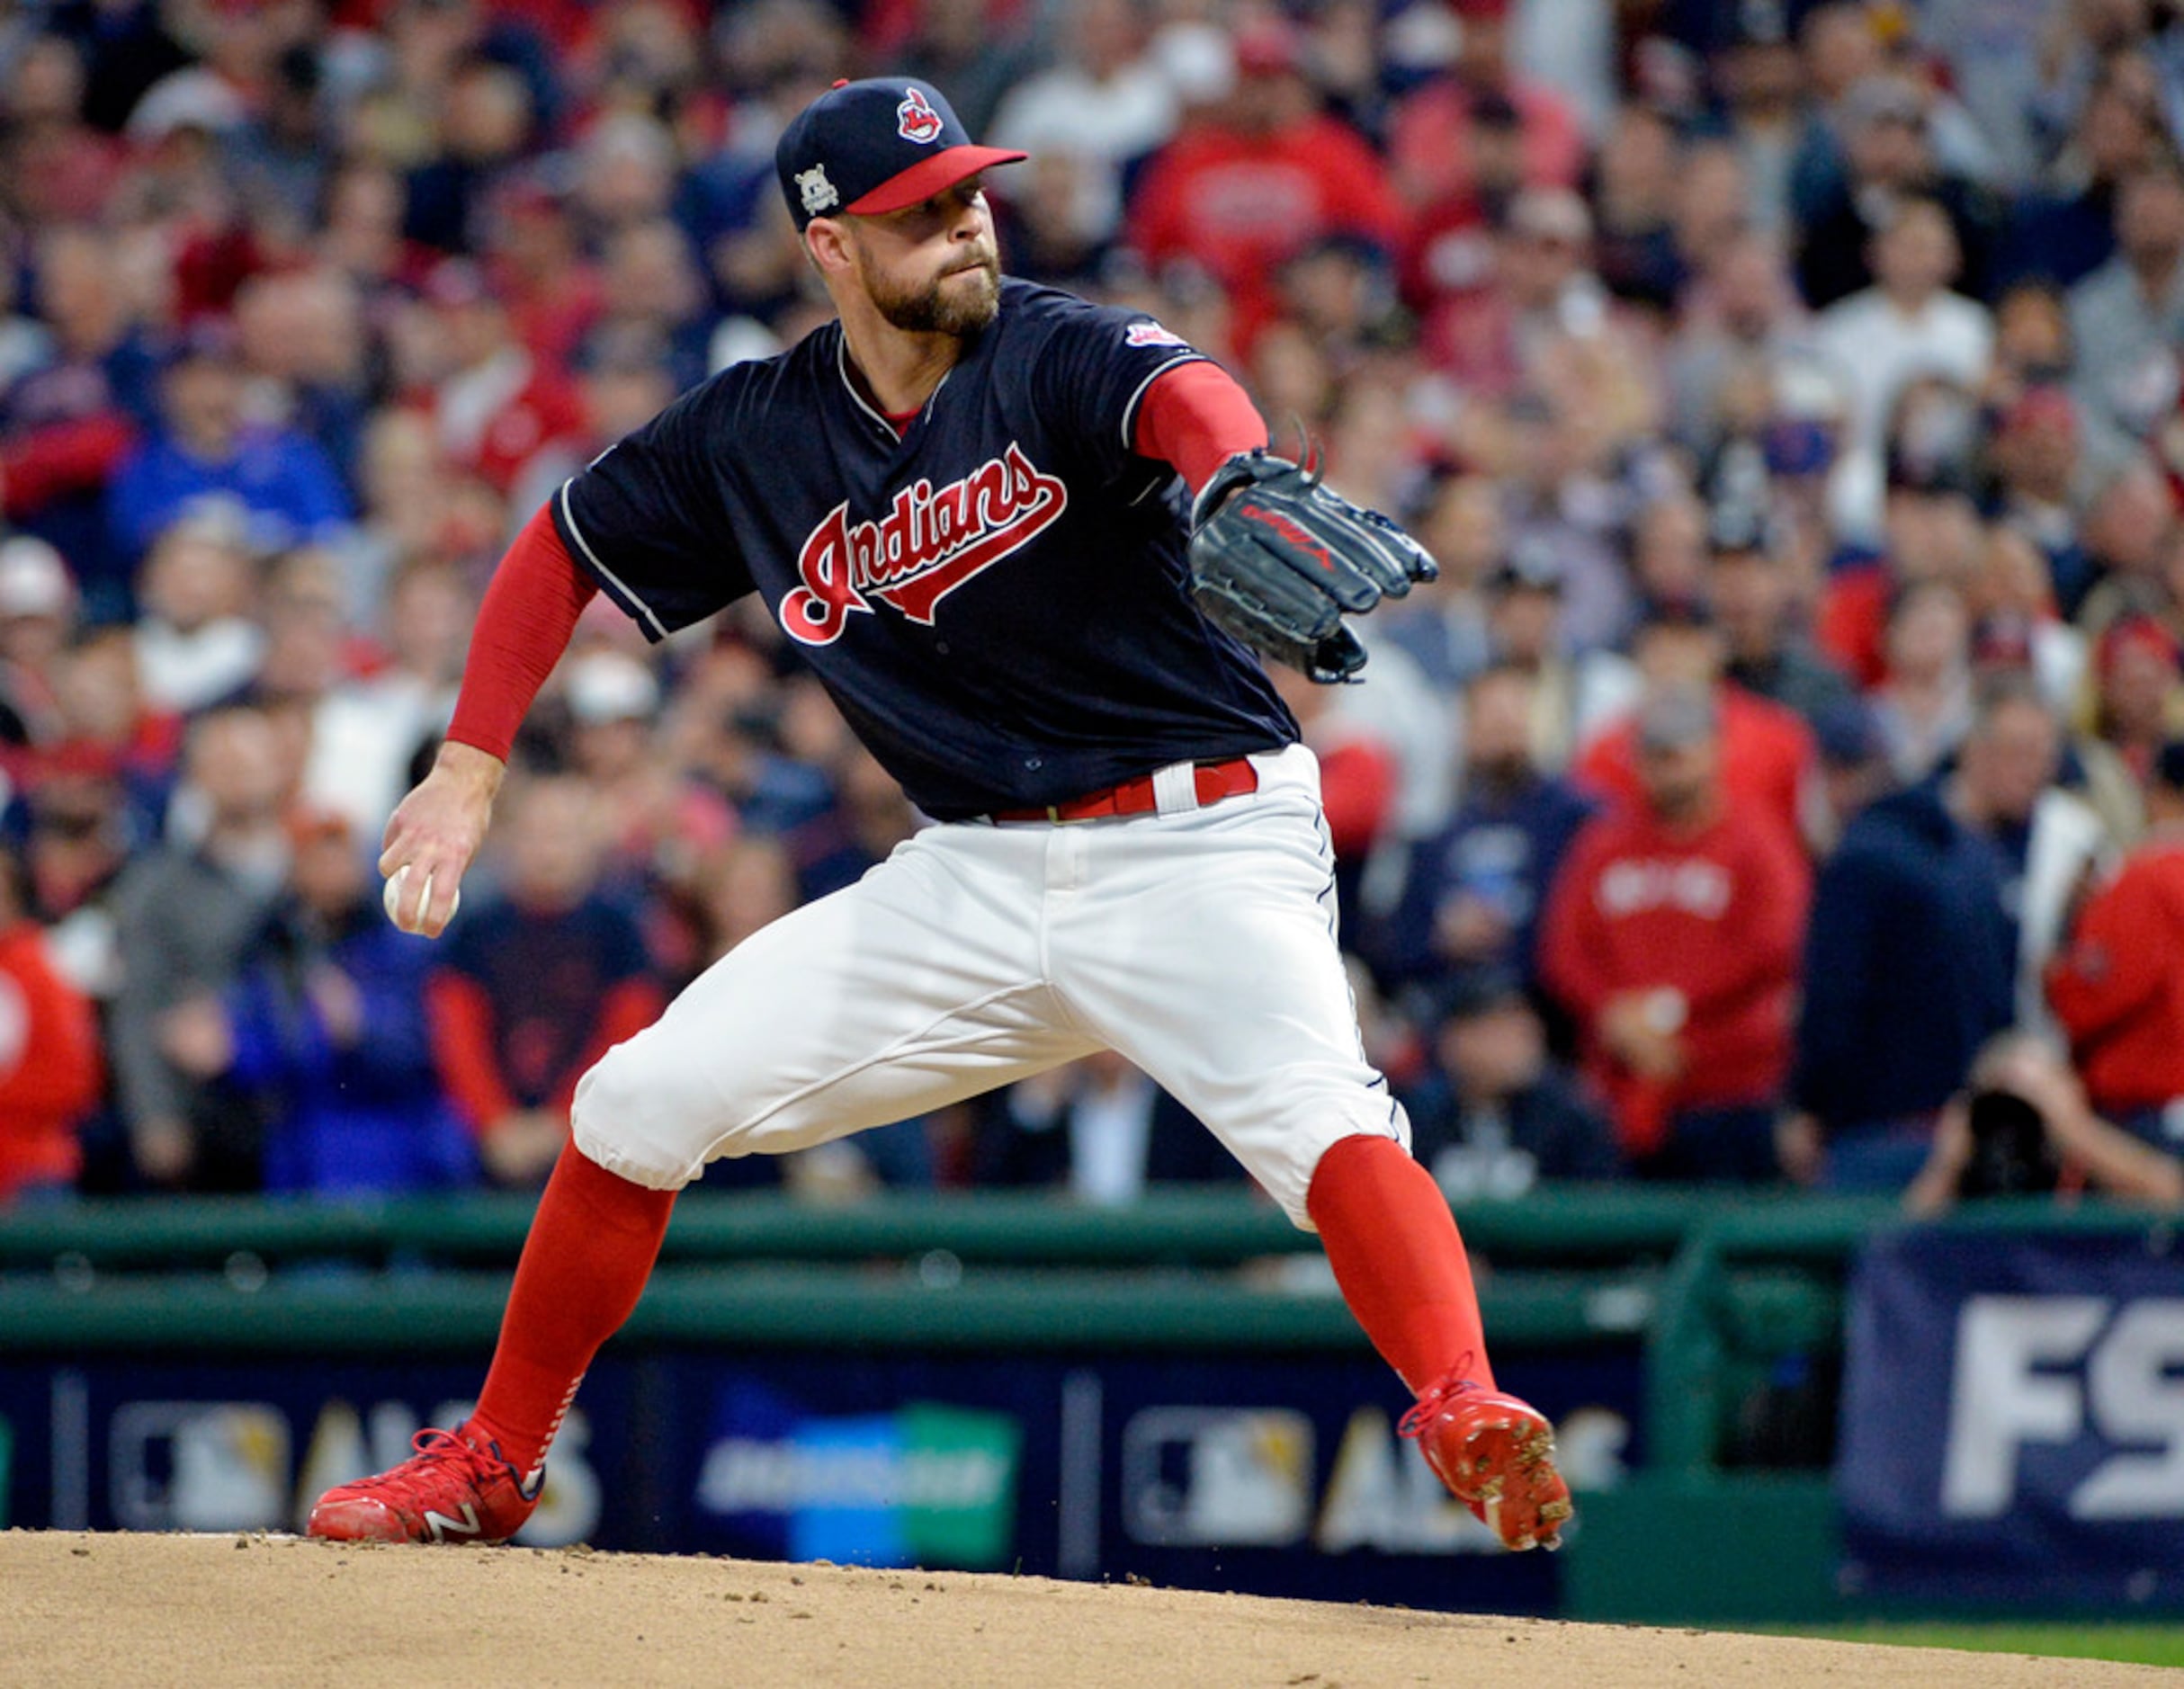 Rangers acquire two-time Cy Young winner Kluber from Cleveland